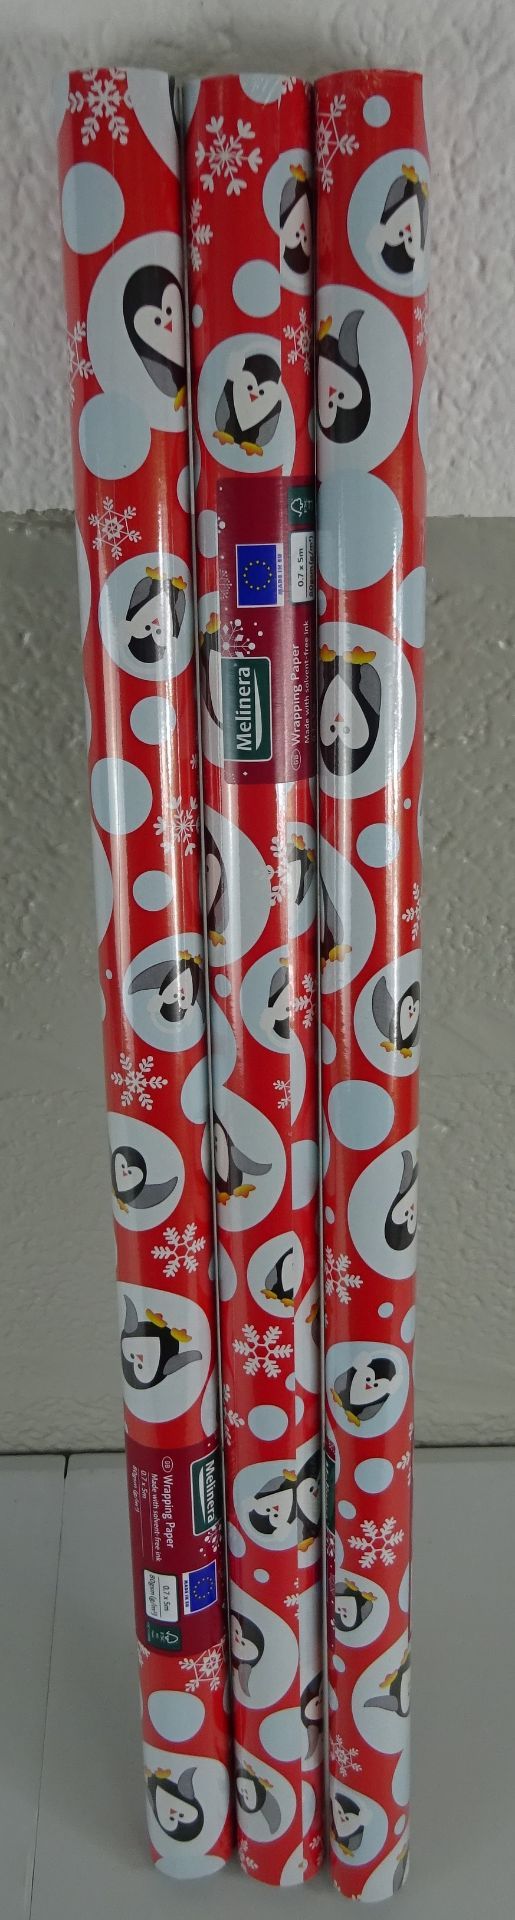 X3 BRAND NEW RED PENGUIN WRAPPING PAPER, PRICE MARKED 99P EACH